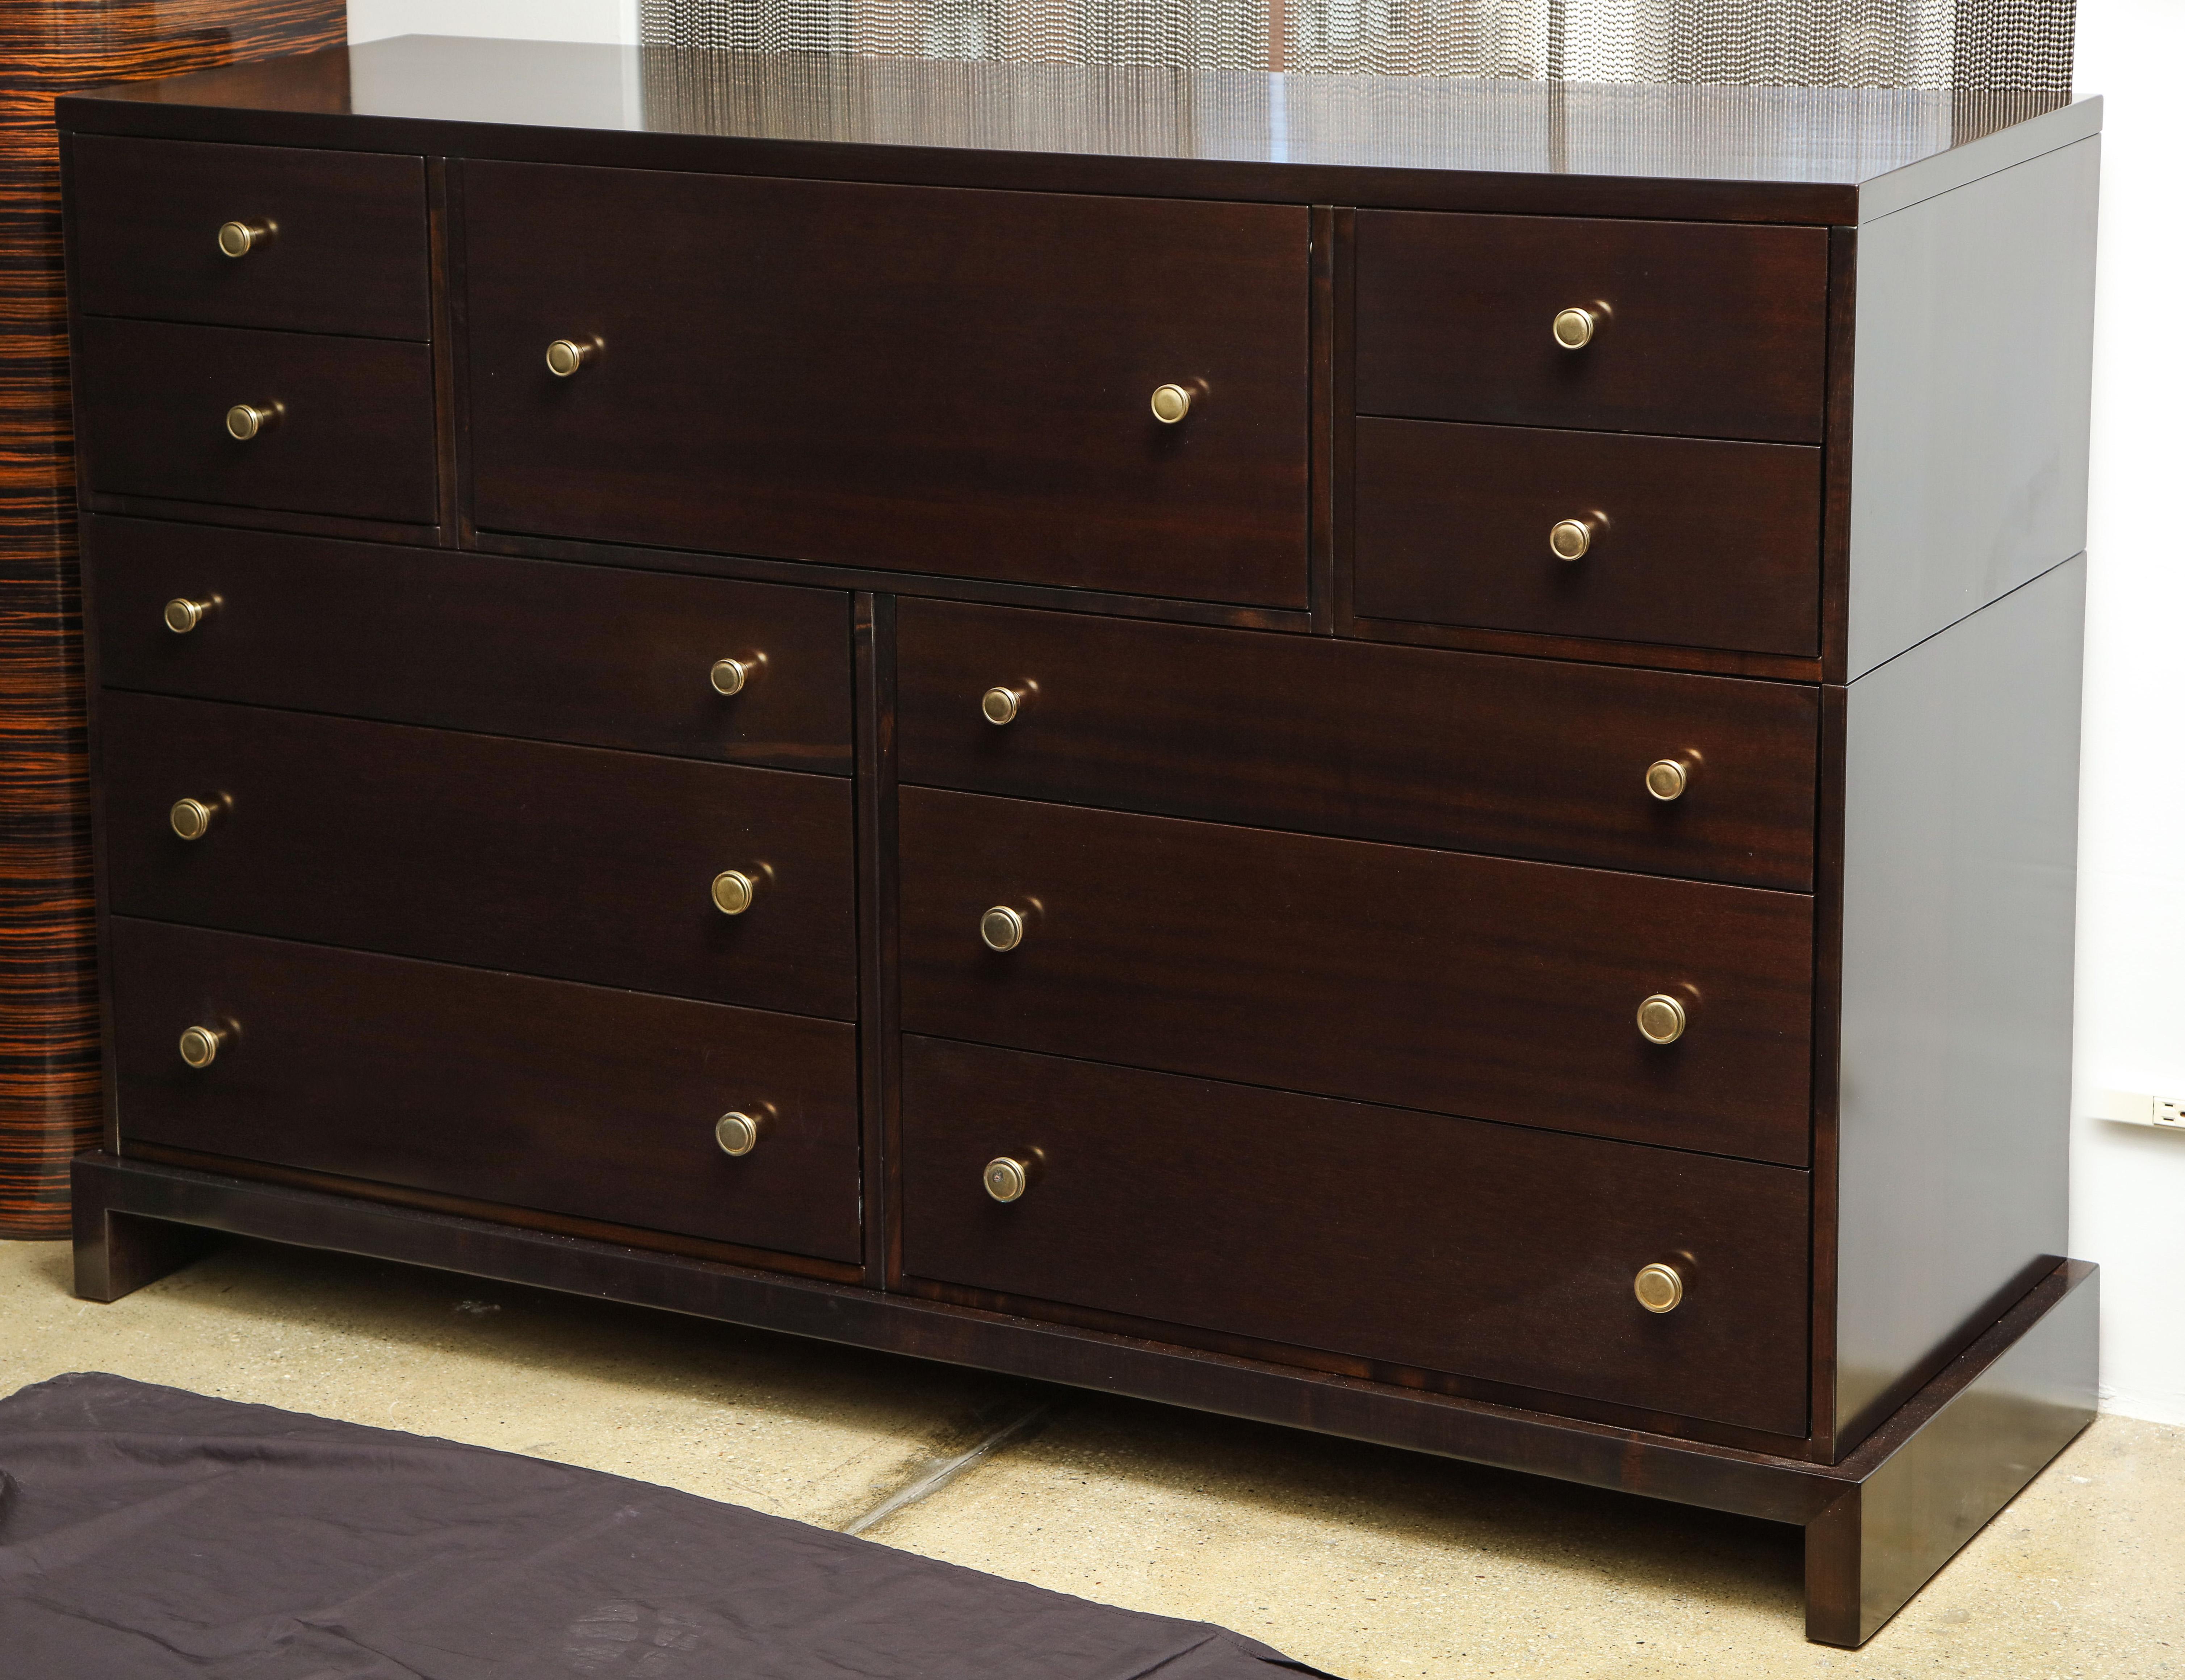 Impressive scale midcentury double dresser with brass button knobs. Cabinet features ample storage and has a center secretary compartment with a drop front which conceals shelves and drawers. Attributed to Robsjohn-Gibbings. Mint restored in a